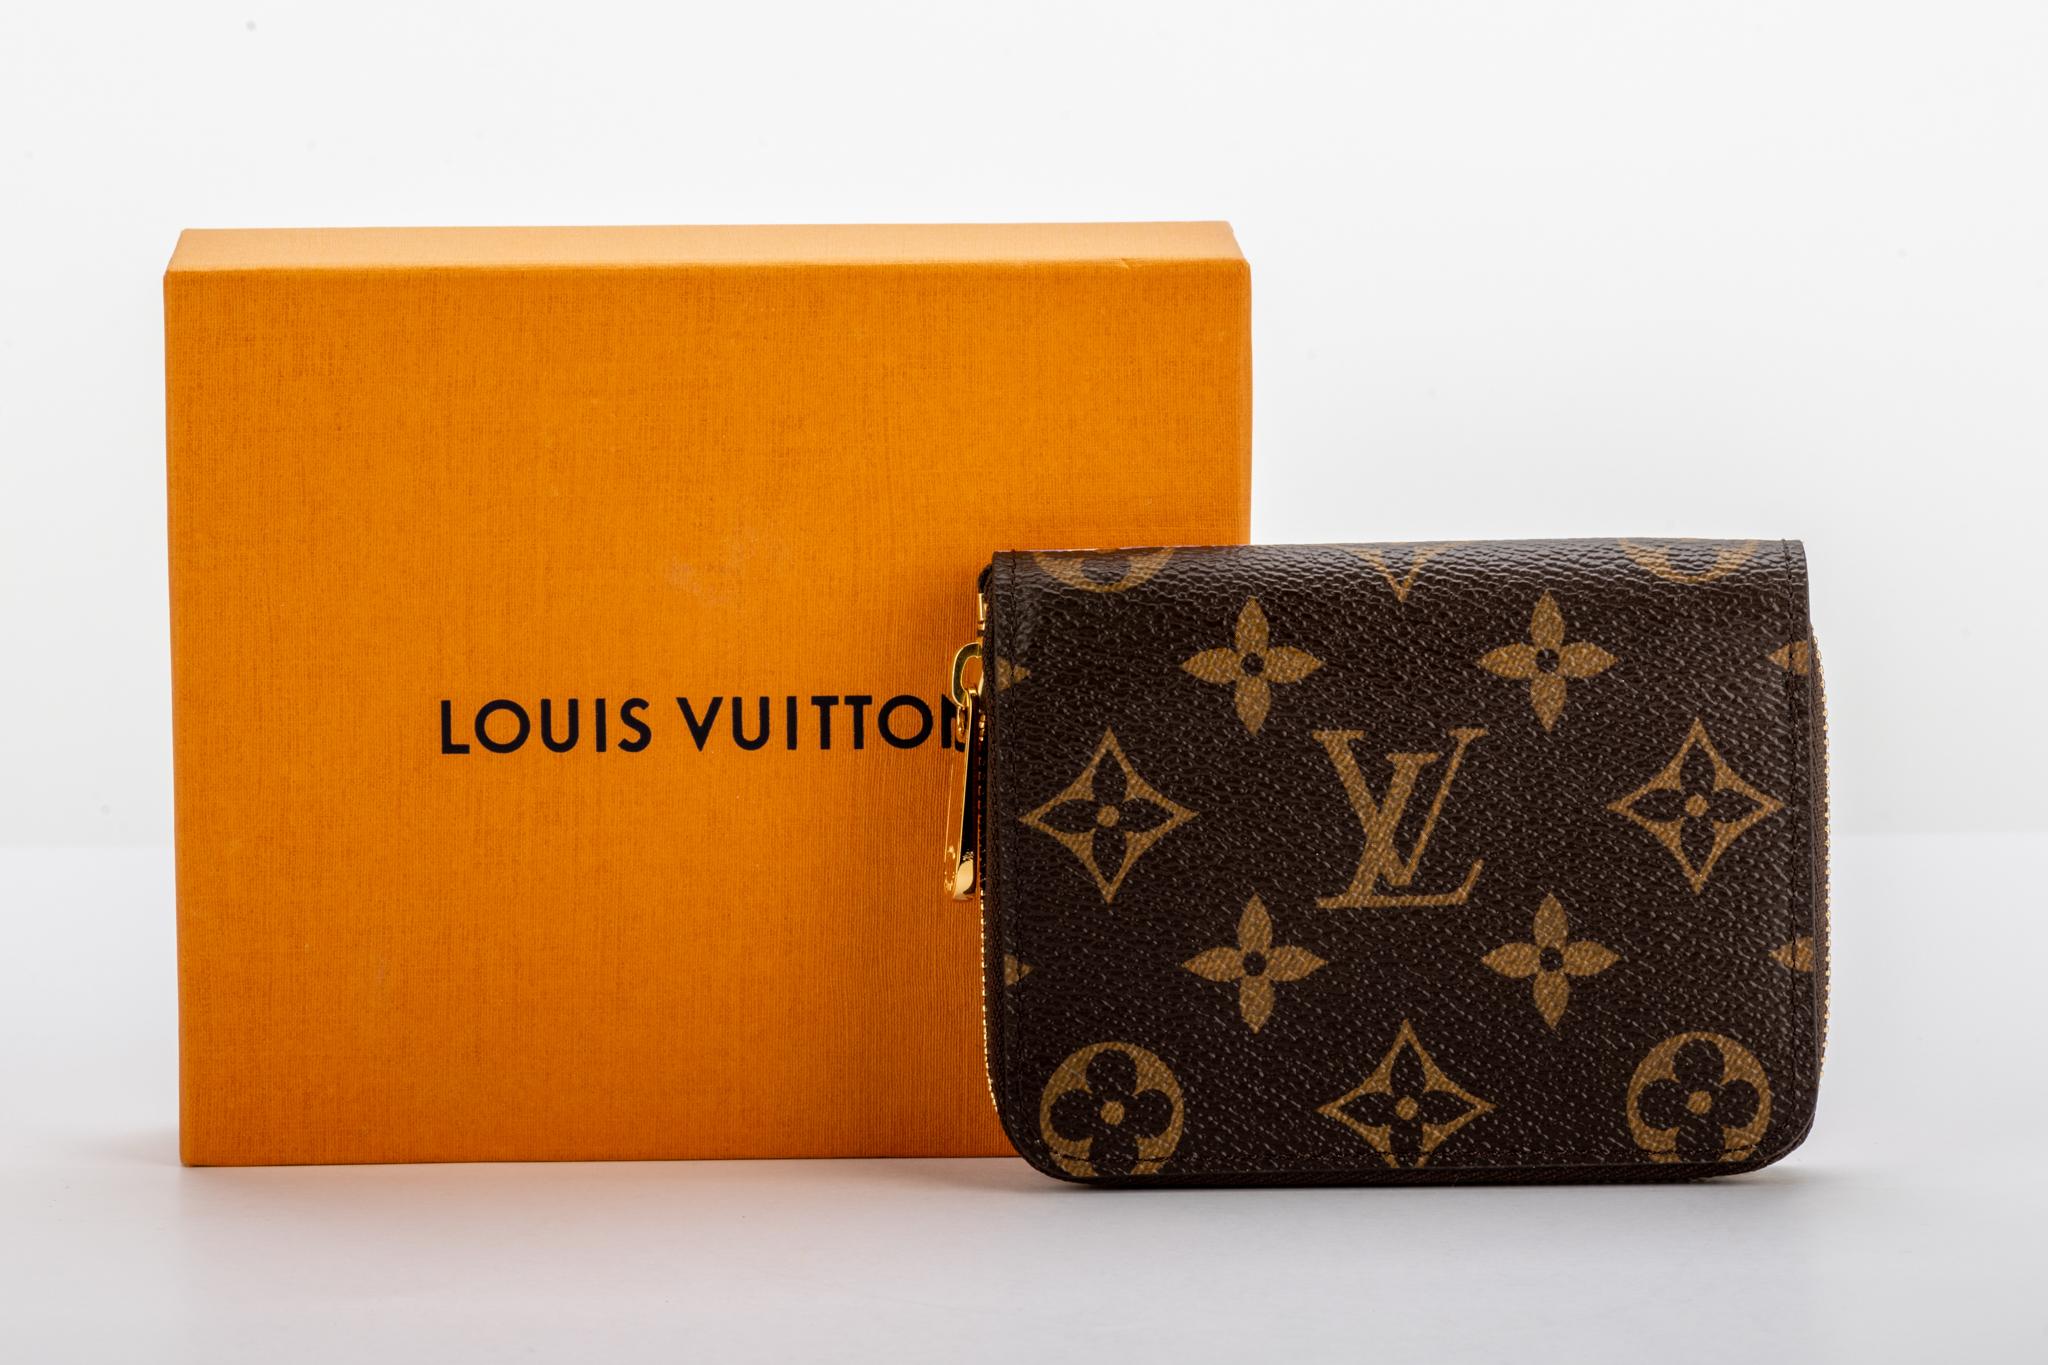 New in box Louis Vuitton limited edition Christmas 2019 Shanghai Hair Balloon zipped wallet. Coated monogram canvas with contrast electric blue leather interior. Comes with dust cover and box.